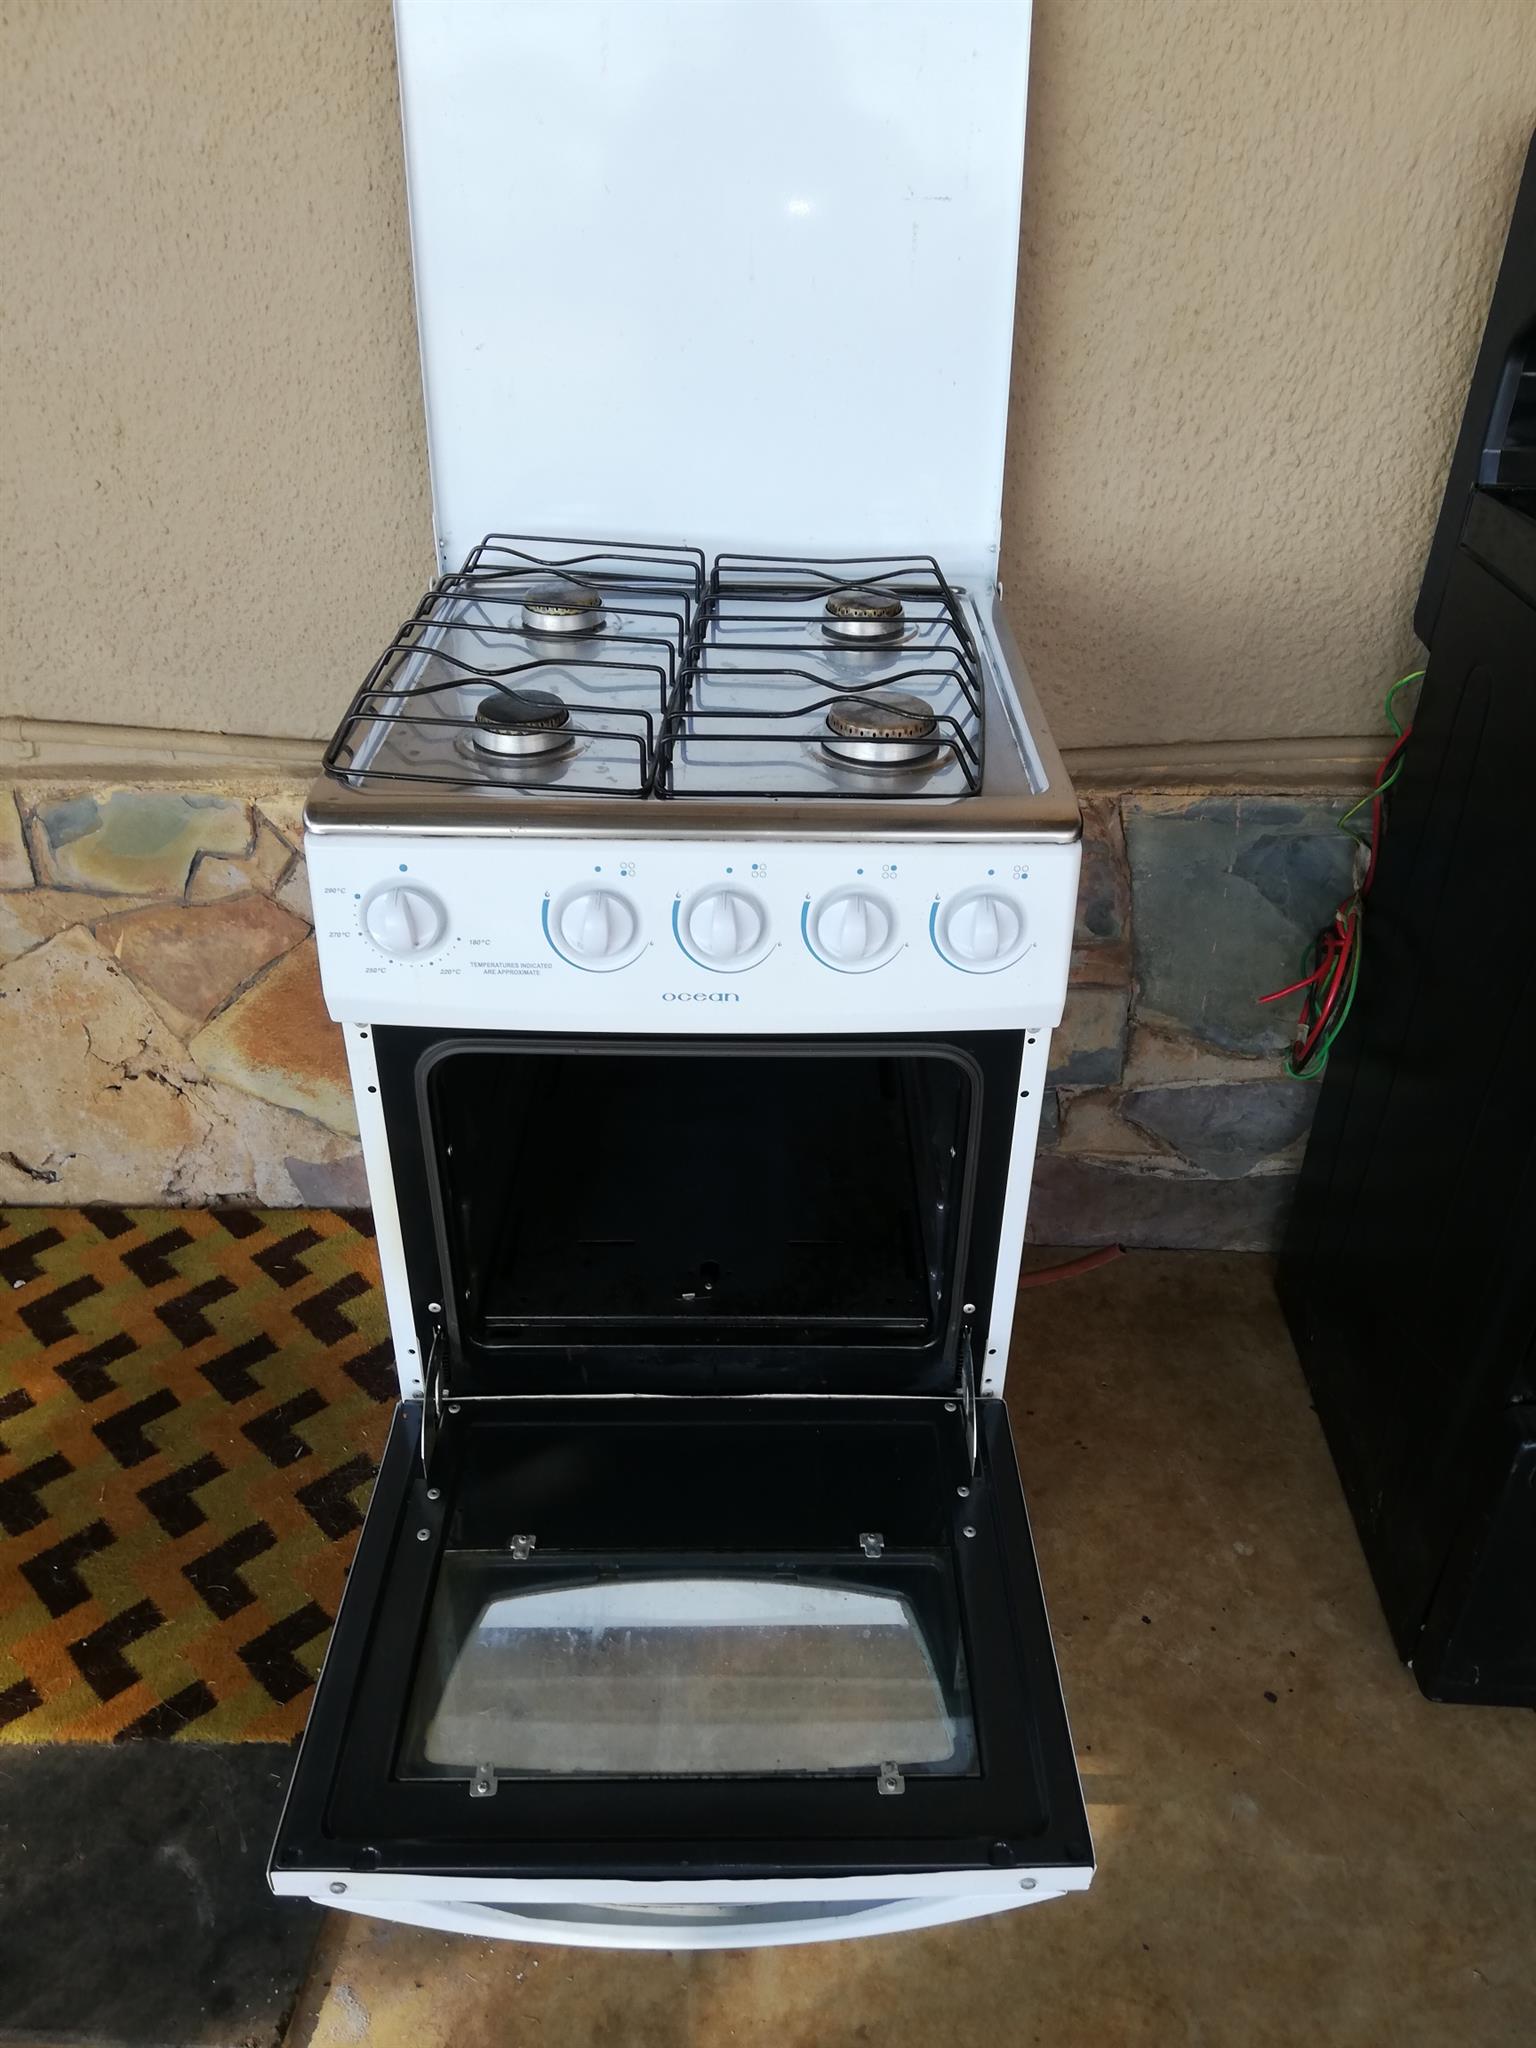 Gas stove for sale